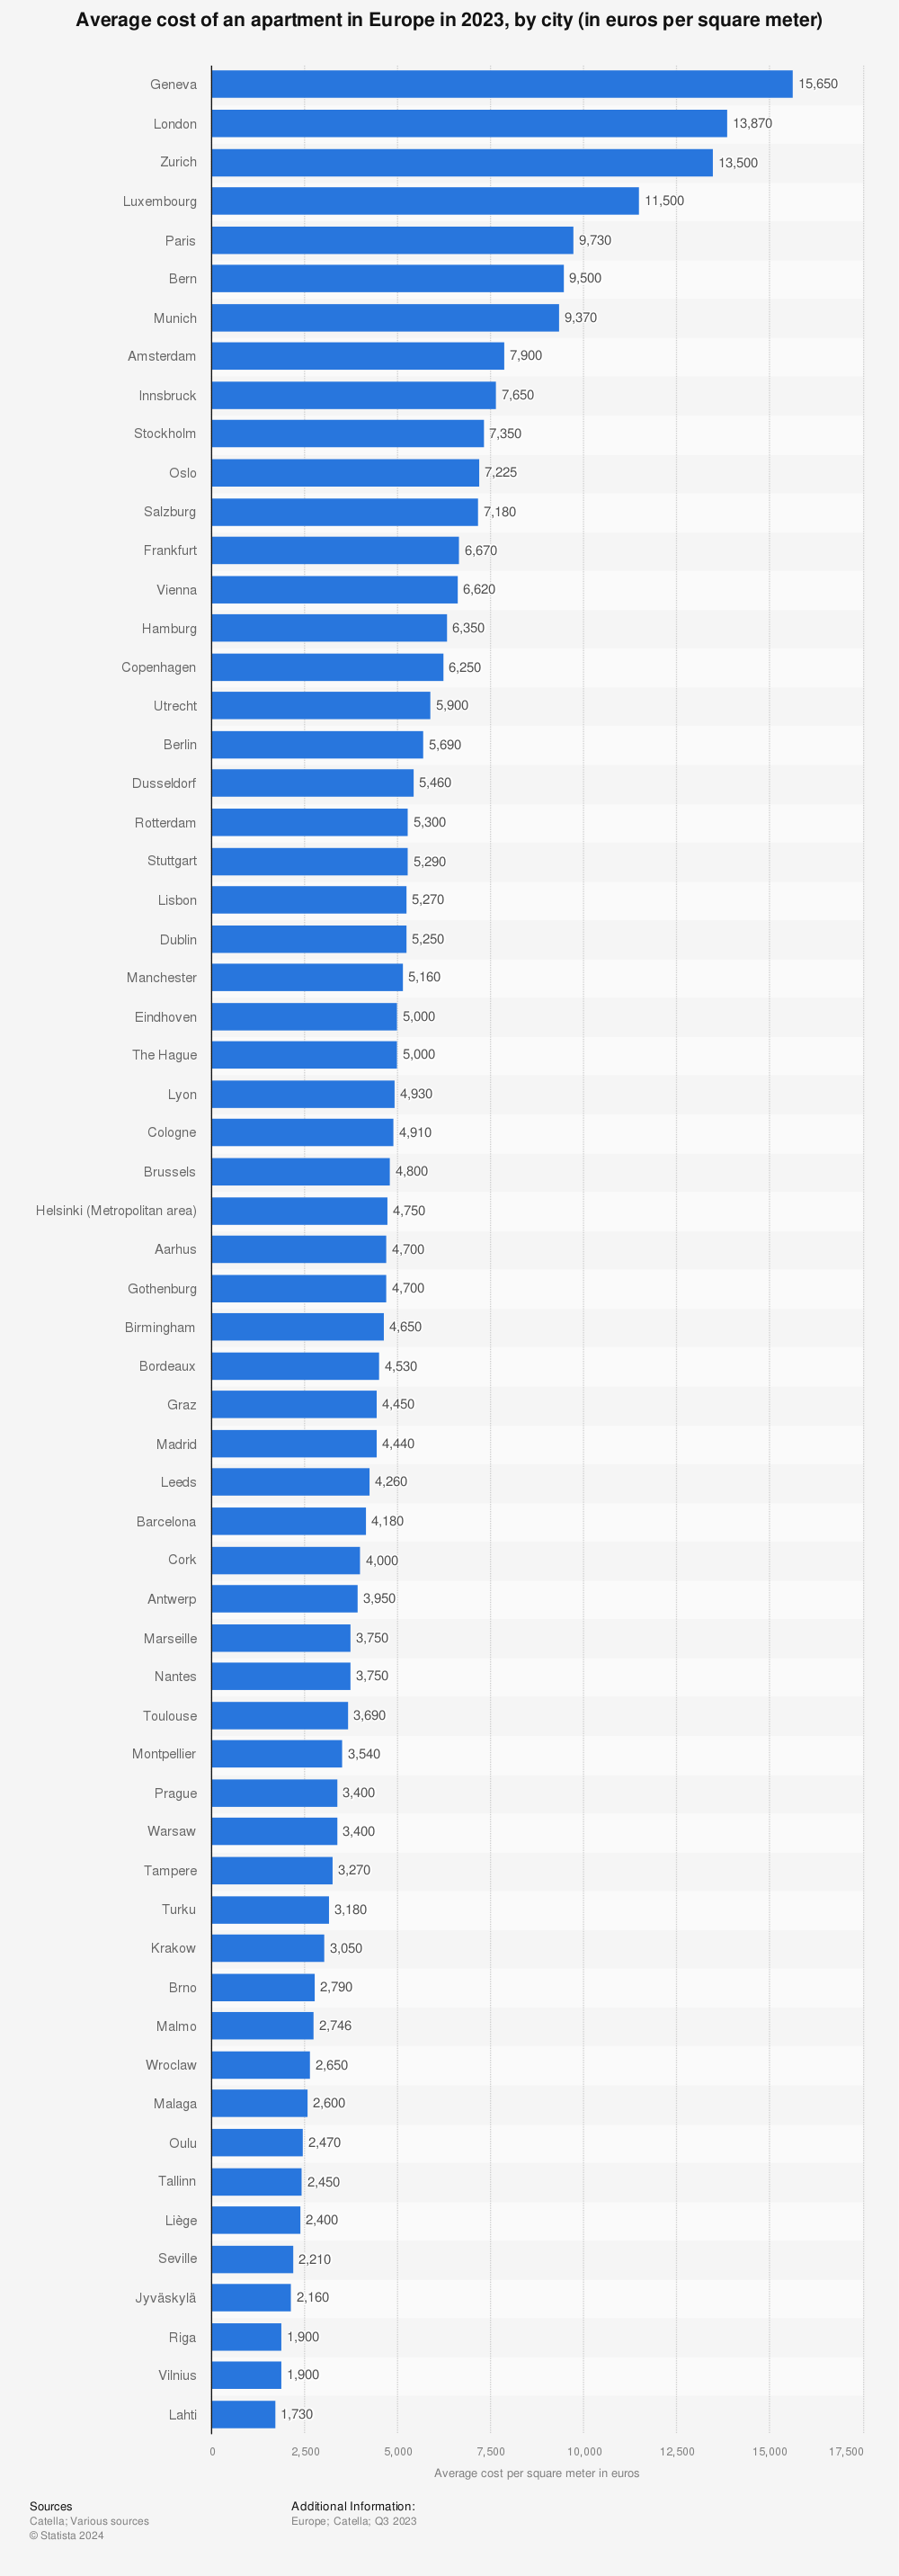 Statistic: Average cost of an apartment in Europe in the 1st quarter 2021 and 1st quarter 2022, by city (in euros per square meter) | Statista